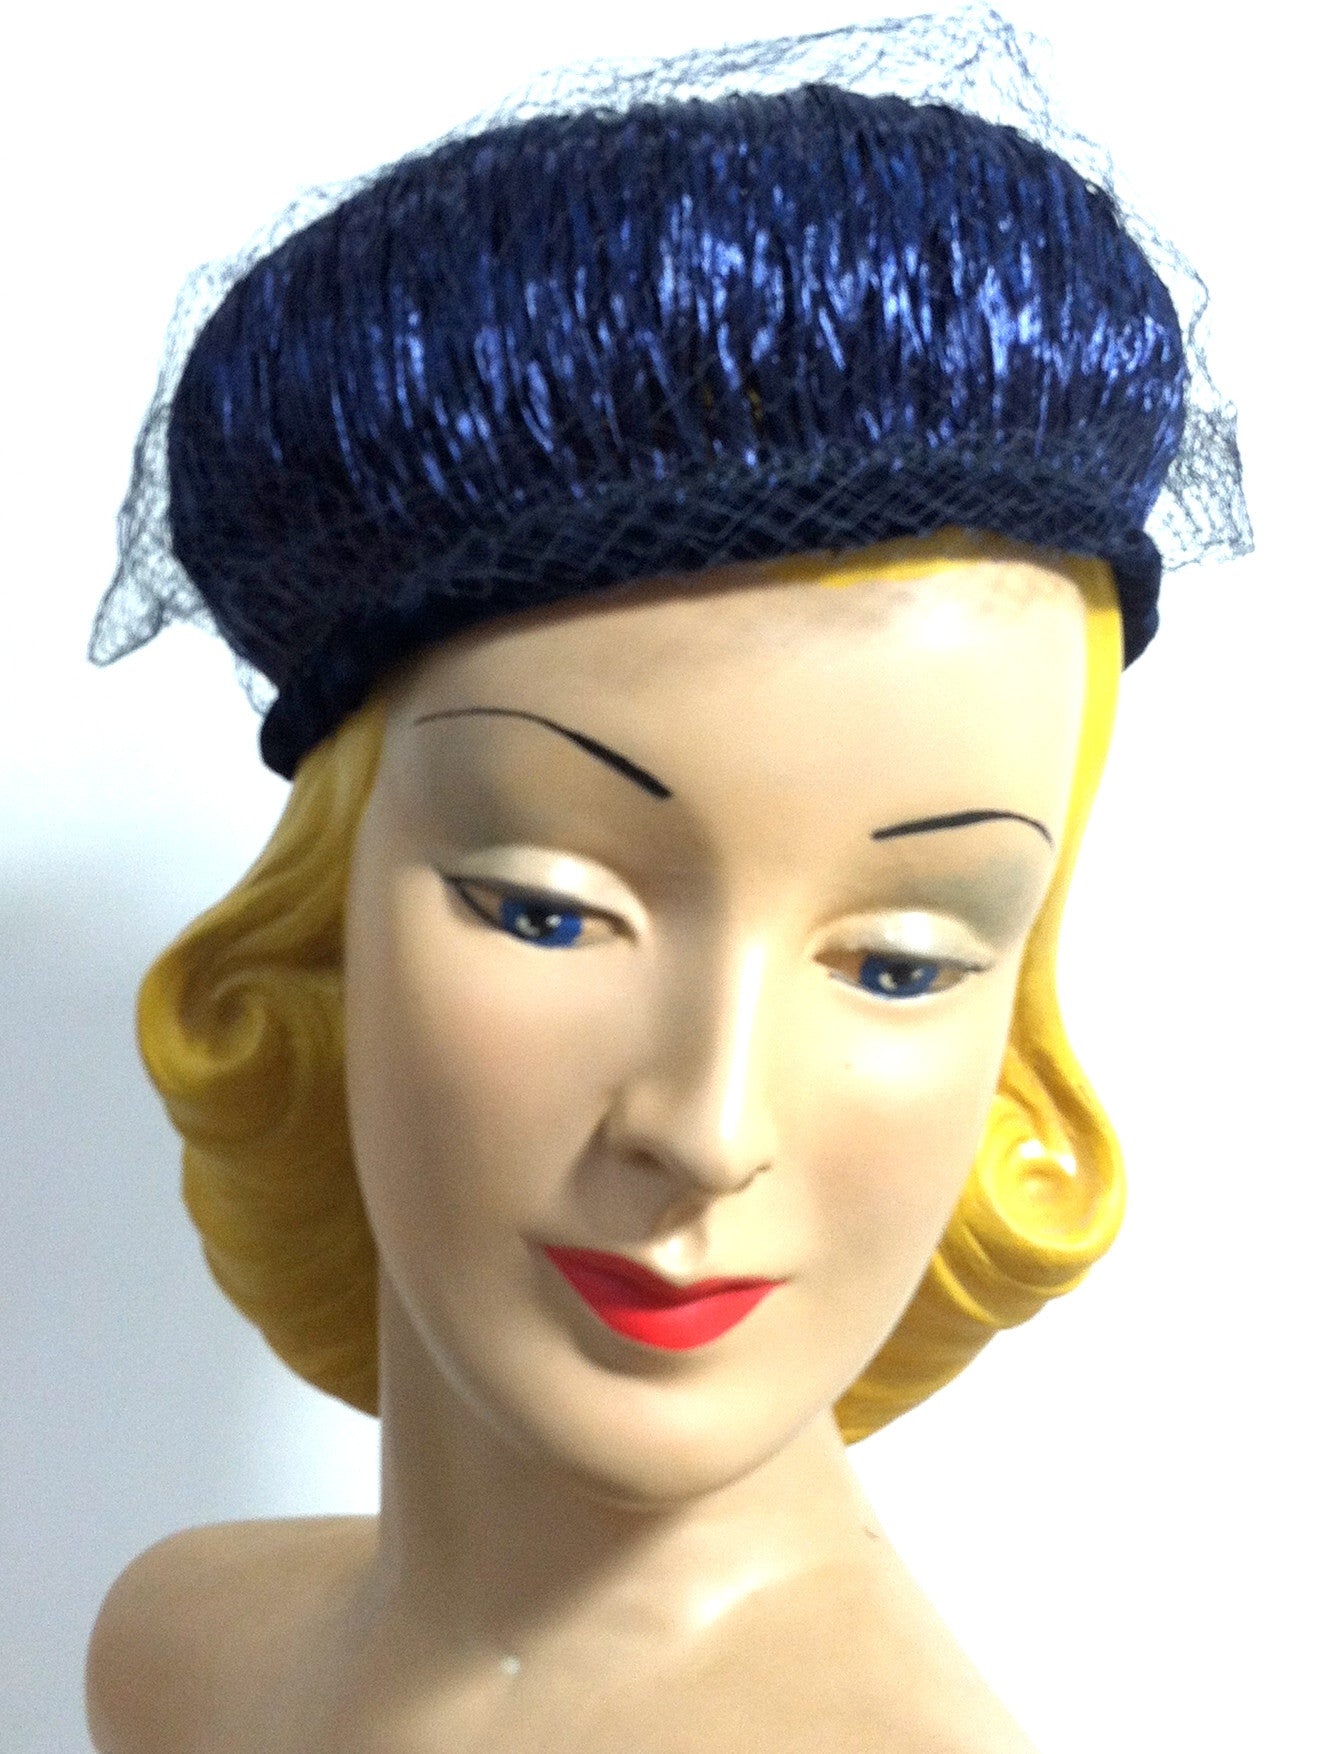 Glossy Raffia Wrapped Blue Veil Topped Hat circa 1960s Dorothea's Closet Vintage Hat 